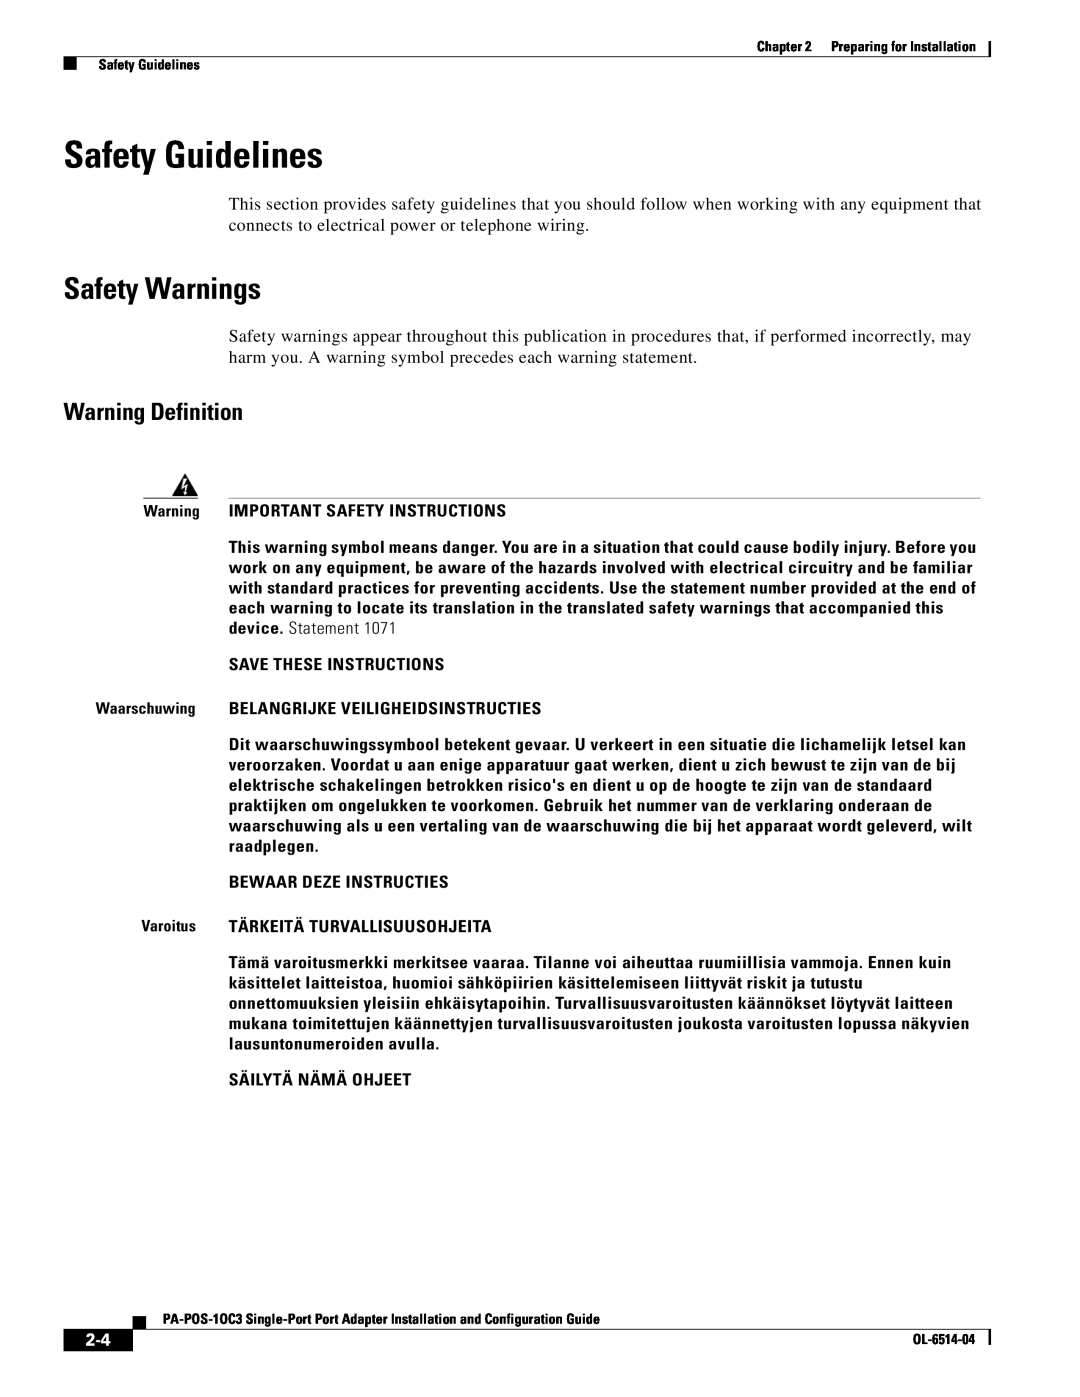 Cisco Systems PA-POS-2OC3 Safety Guidelines, Safety Warnings, Warning Definition, Warning IMPORTANT SAFETY INSTRUCTIONS 